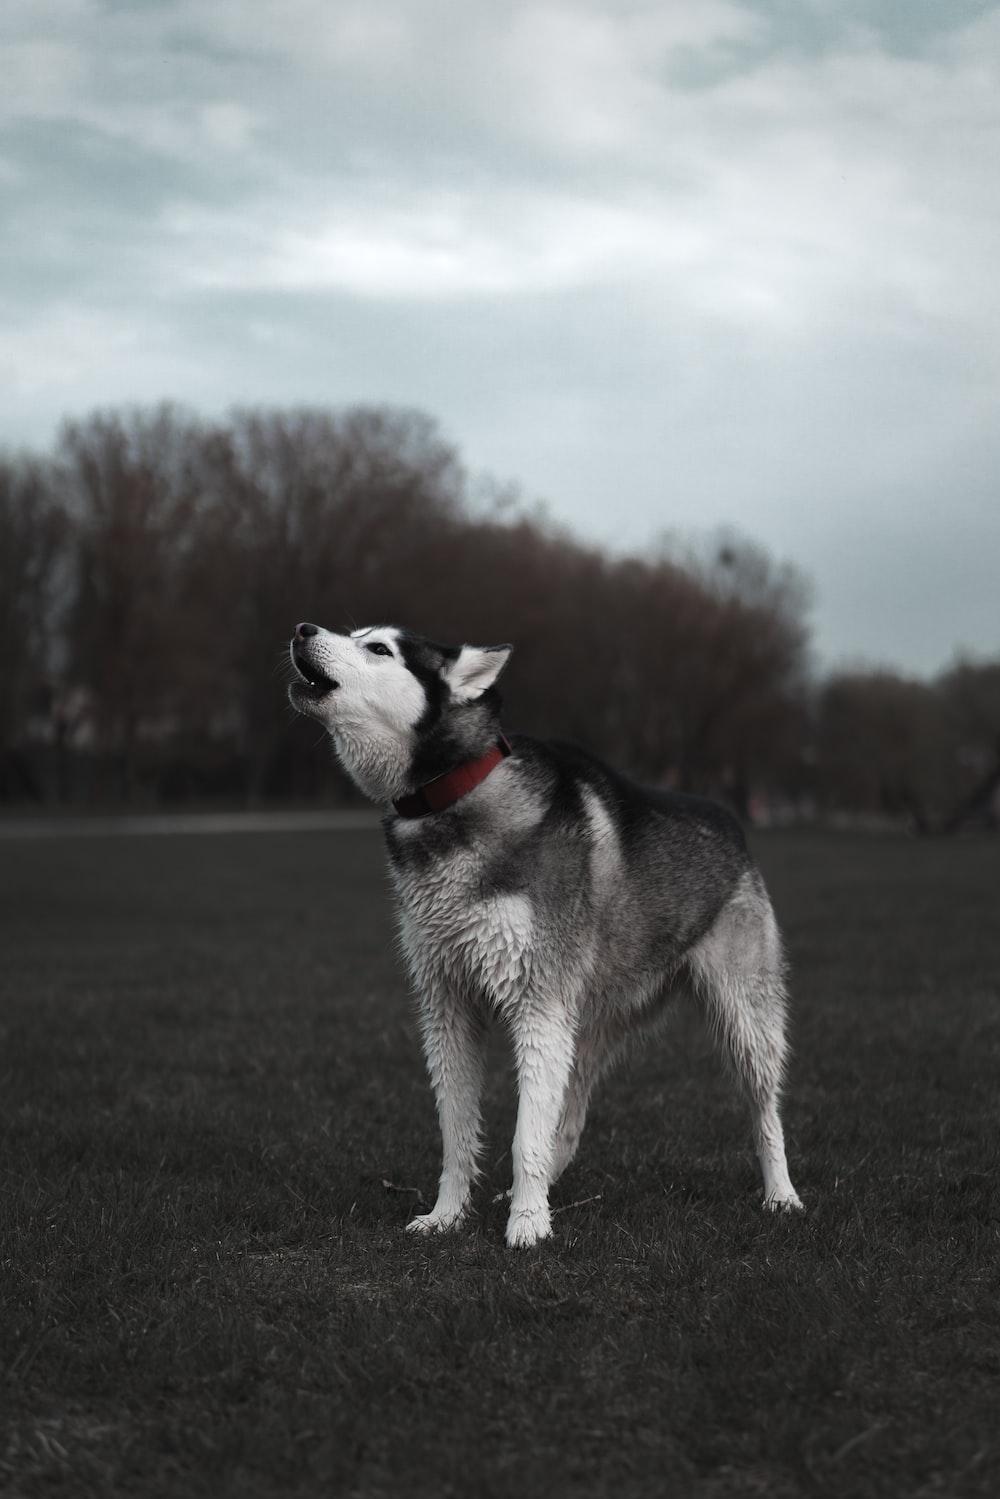 Black And White Siberian Husky Running On Green Grass Field During